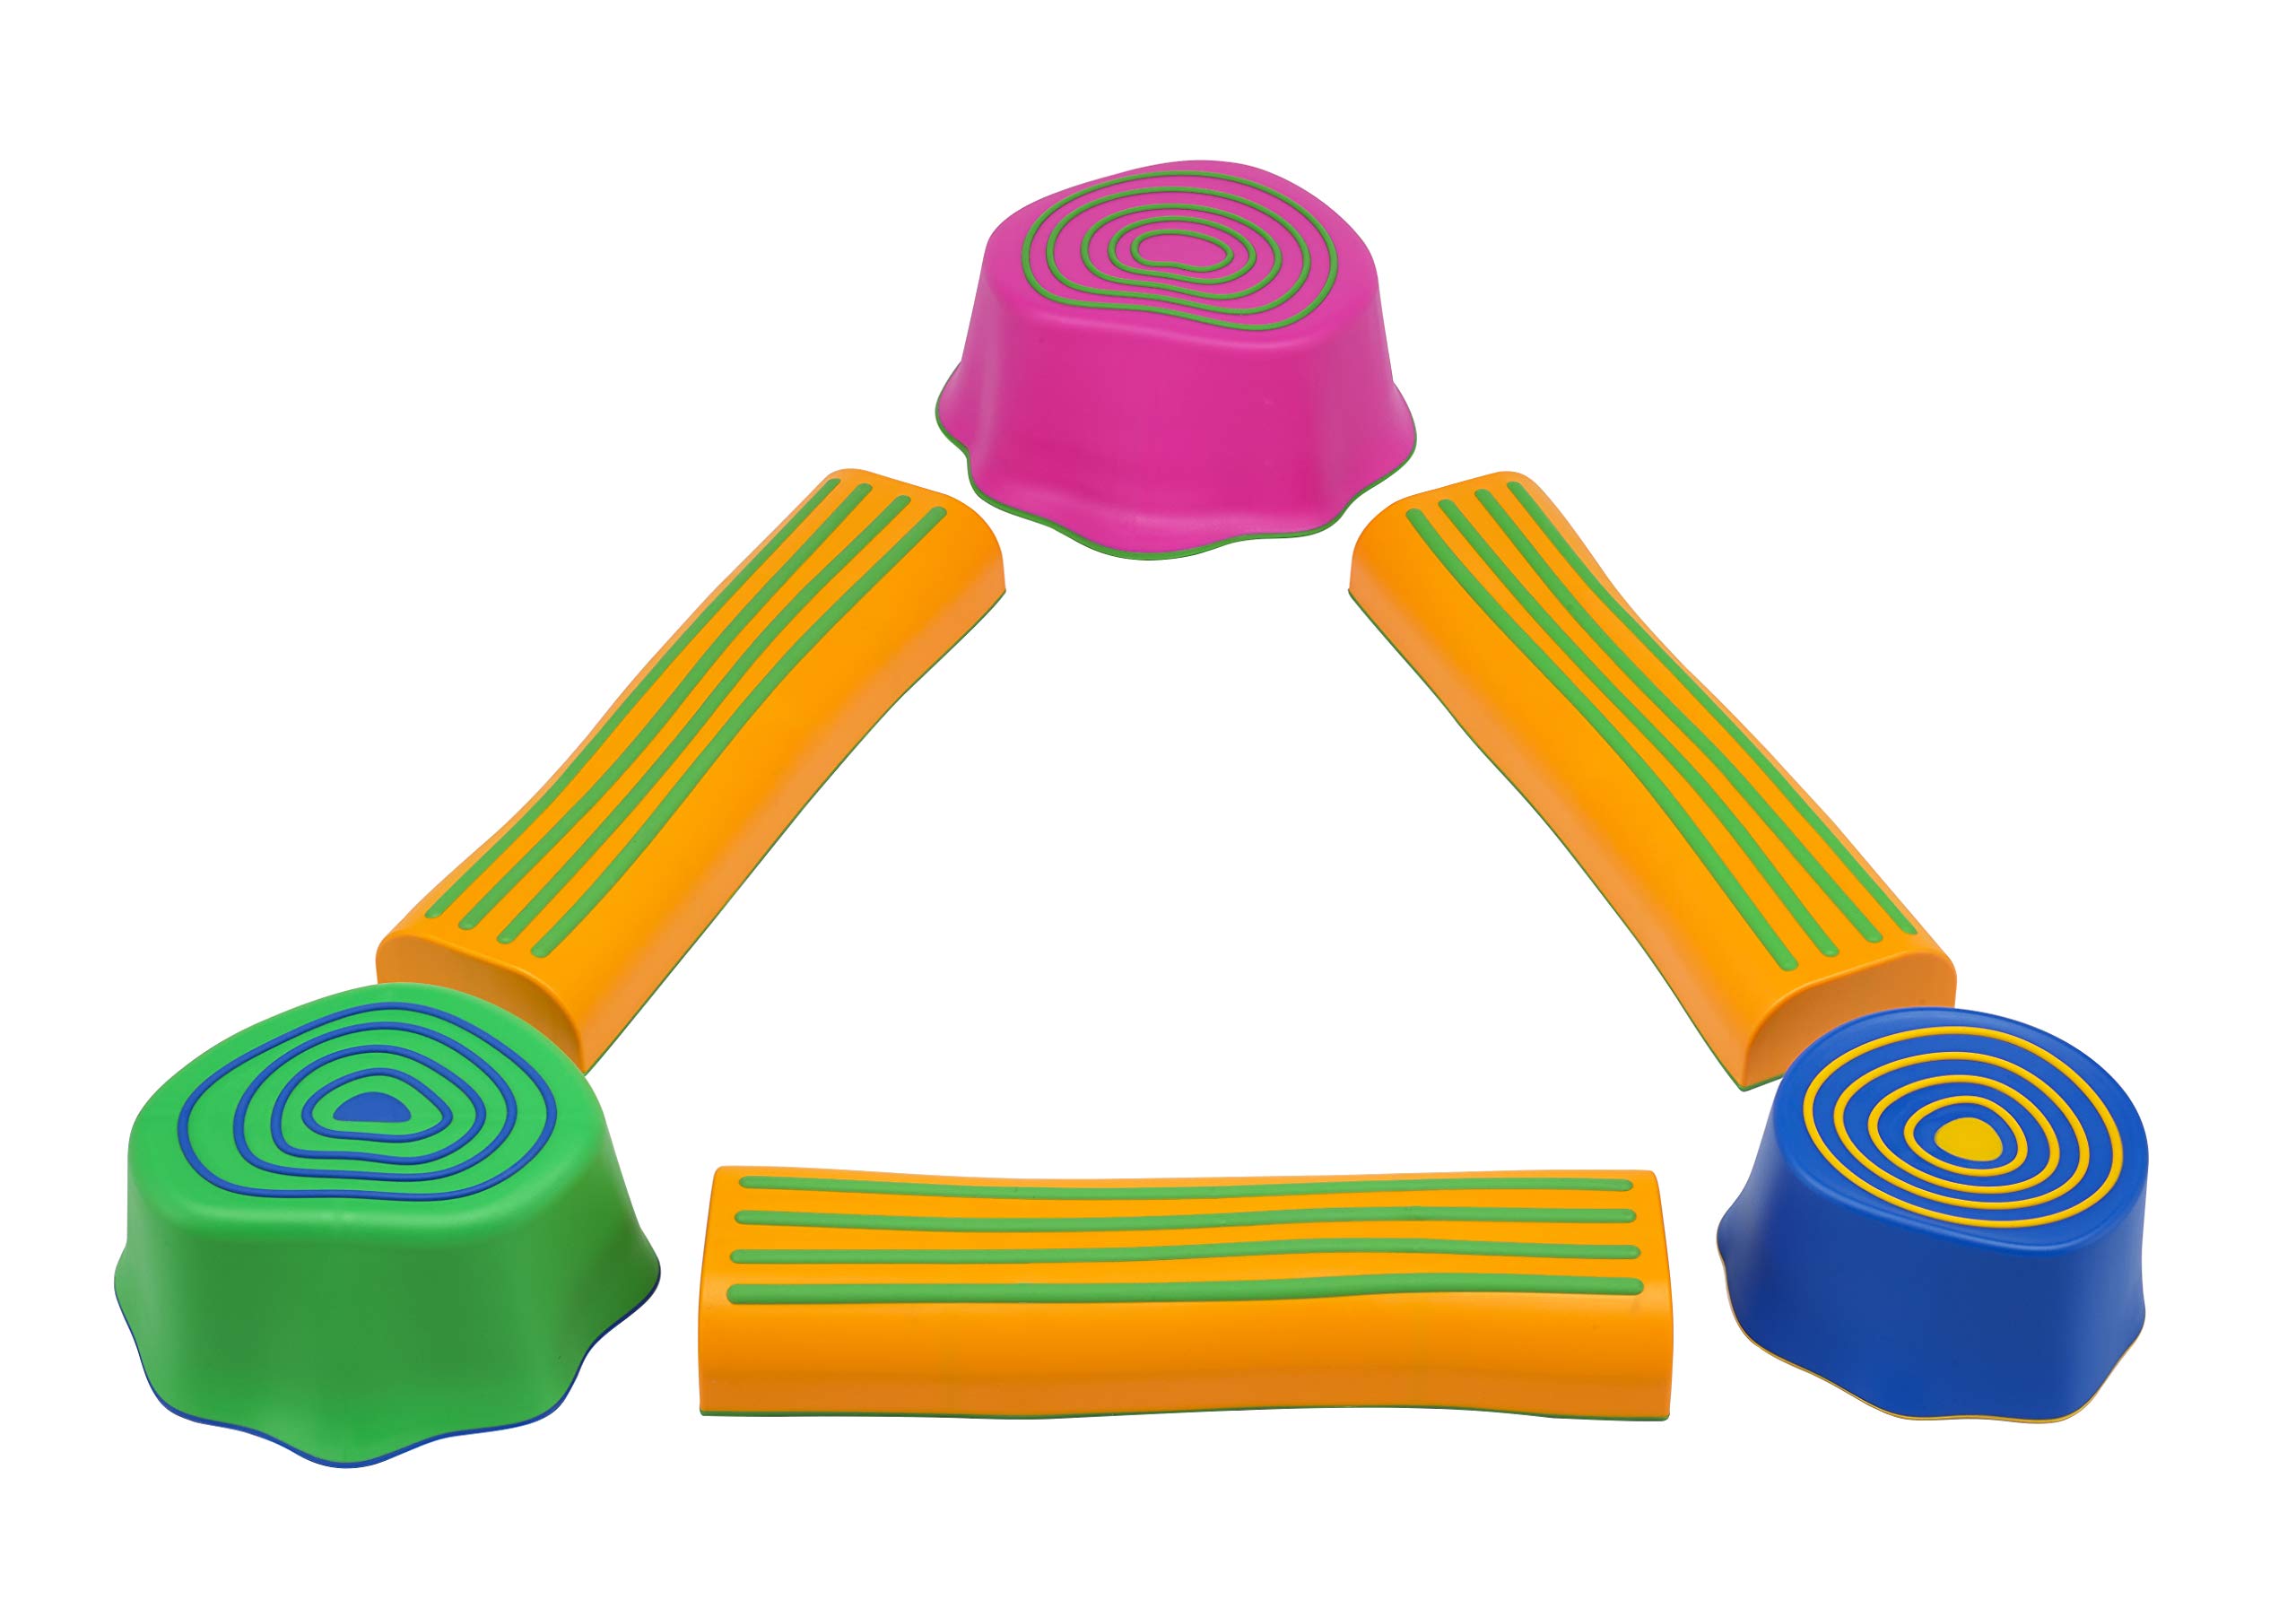 edxeducation Step-a-Trail - 6 Piece Backyard Obstacle Course for Kids - Indoor and Outdoor - Build Coordination and Confidence - Physical and Sensory Play